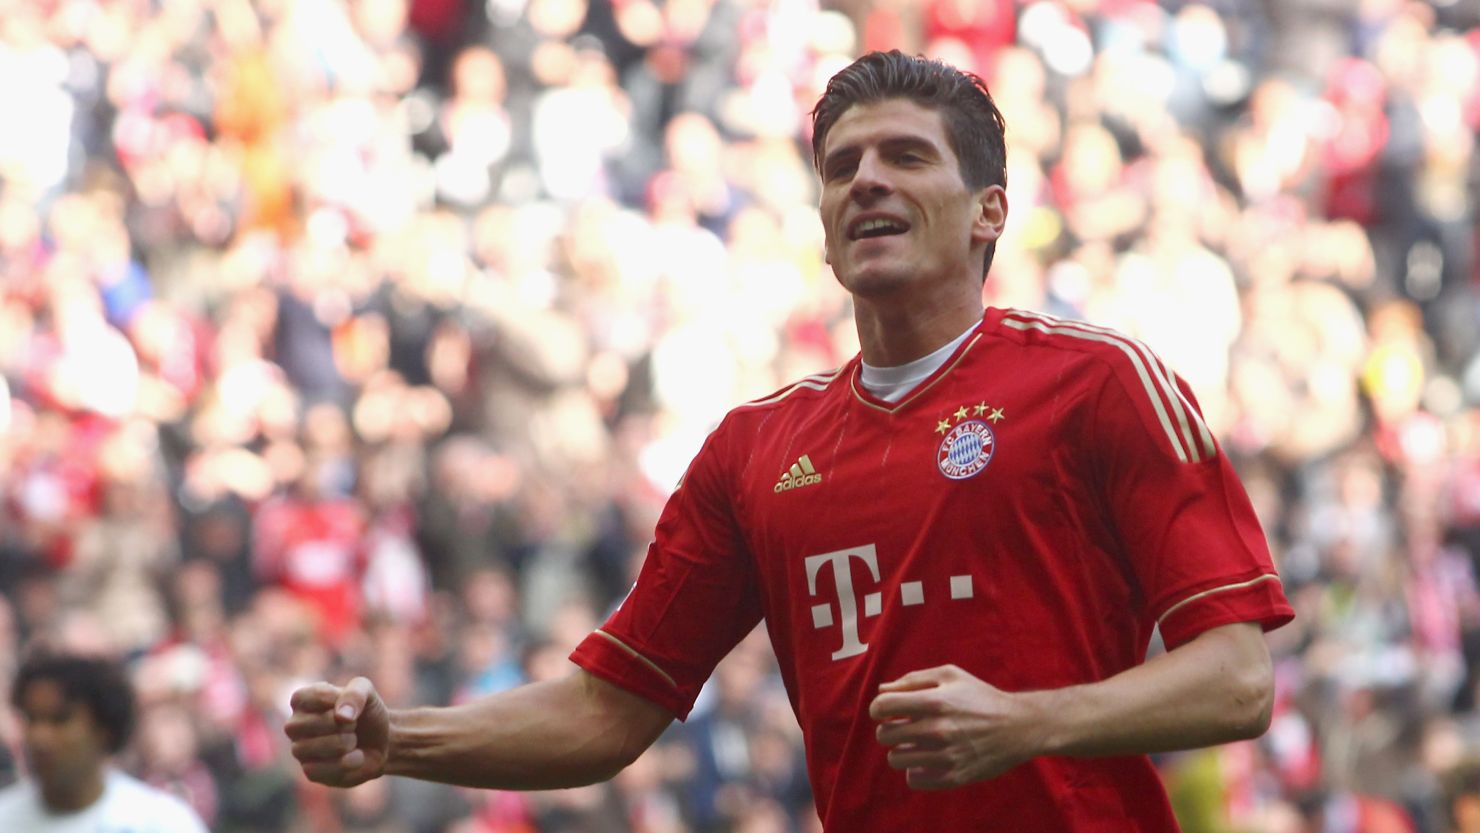 Mario Gomez celebrates his opening goal in Bayern Munich's 7-1 rout of Hoffenheim.